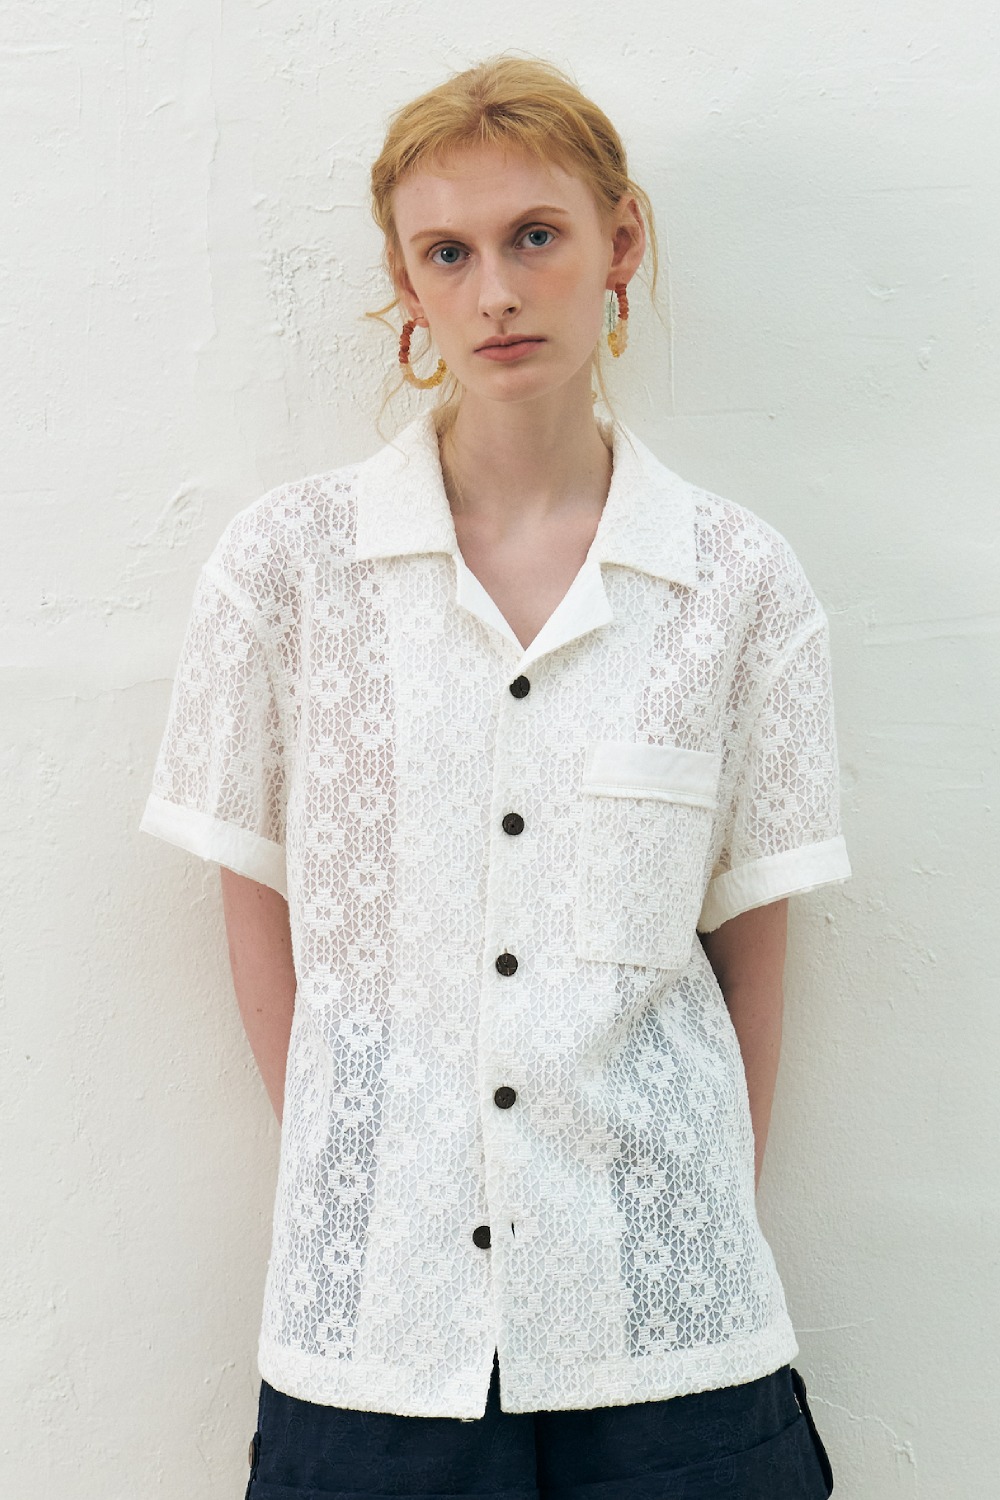 Lace Embroidered Cotton Shirt, White